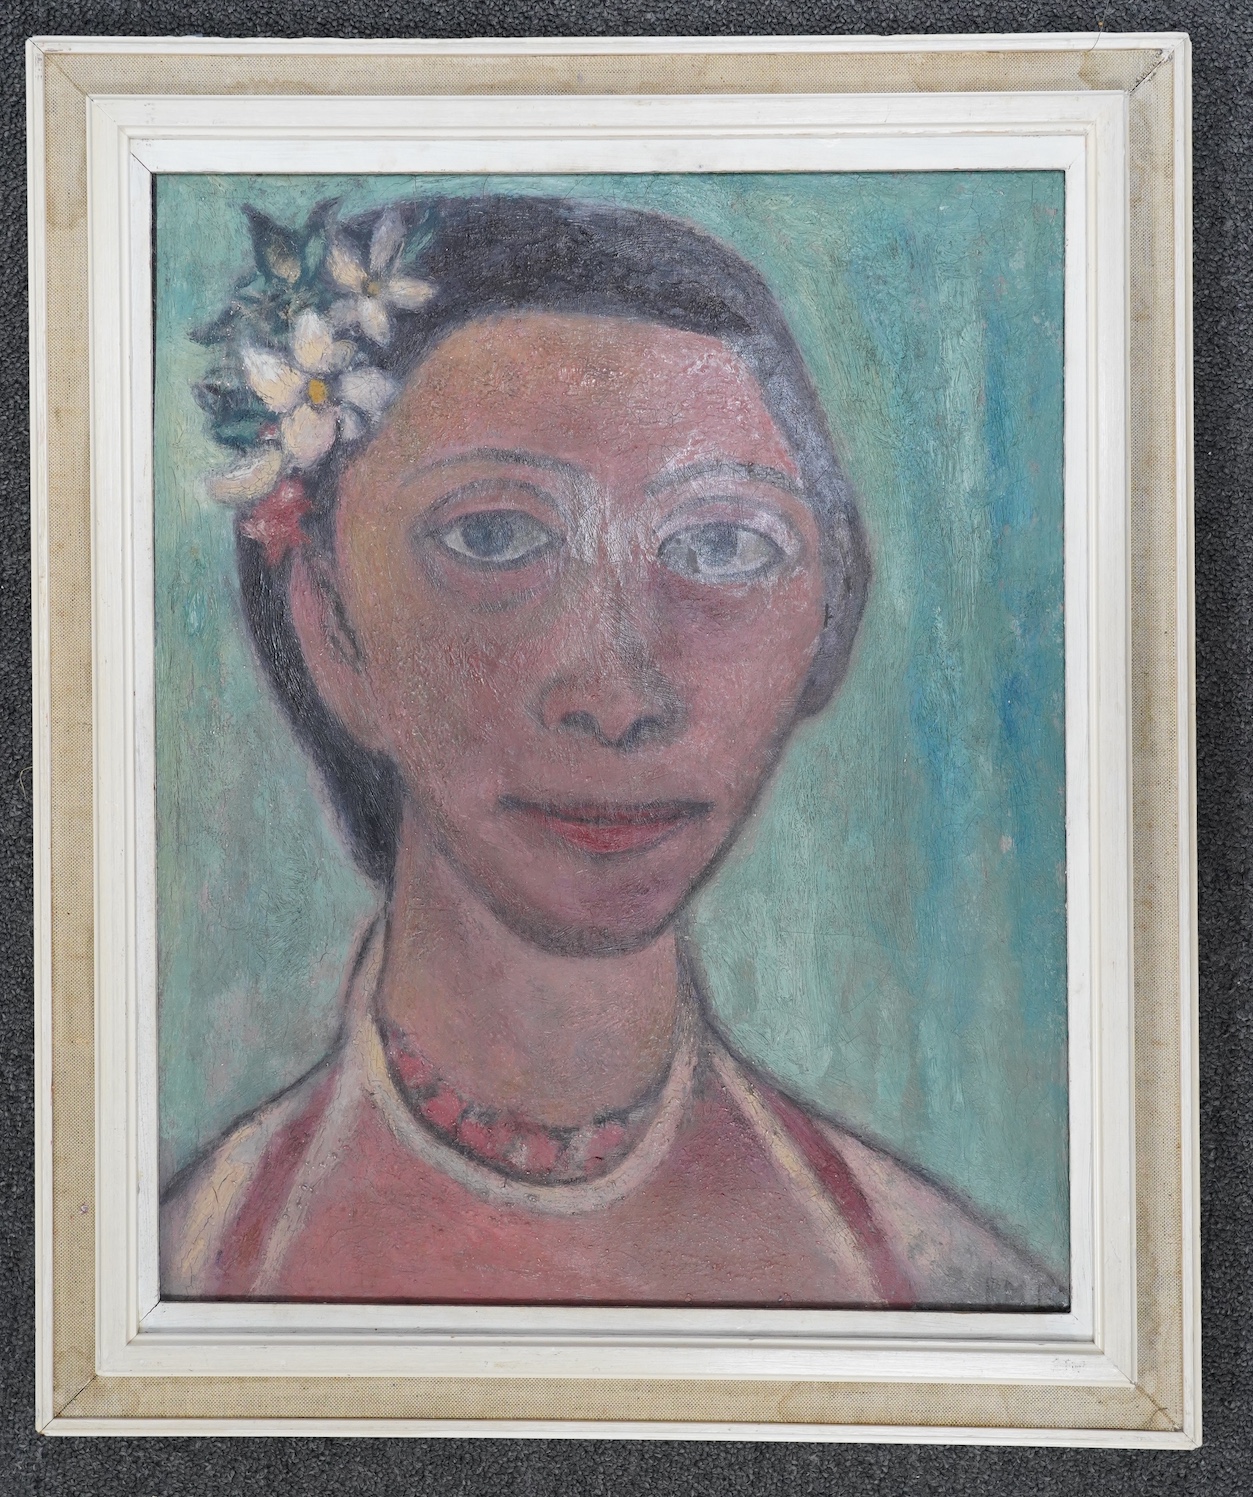 After Paula Modersohn-Becker (German, 1876-1907), oil on canvas, Portrait of a girl, 47 x 37cm. Condition - good, some surface dirt and minor craquelure